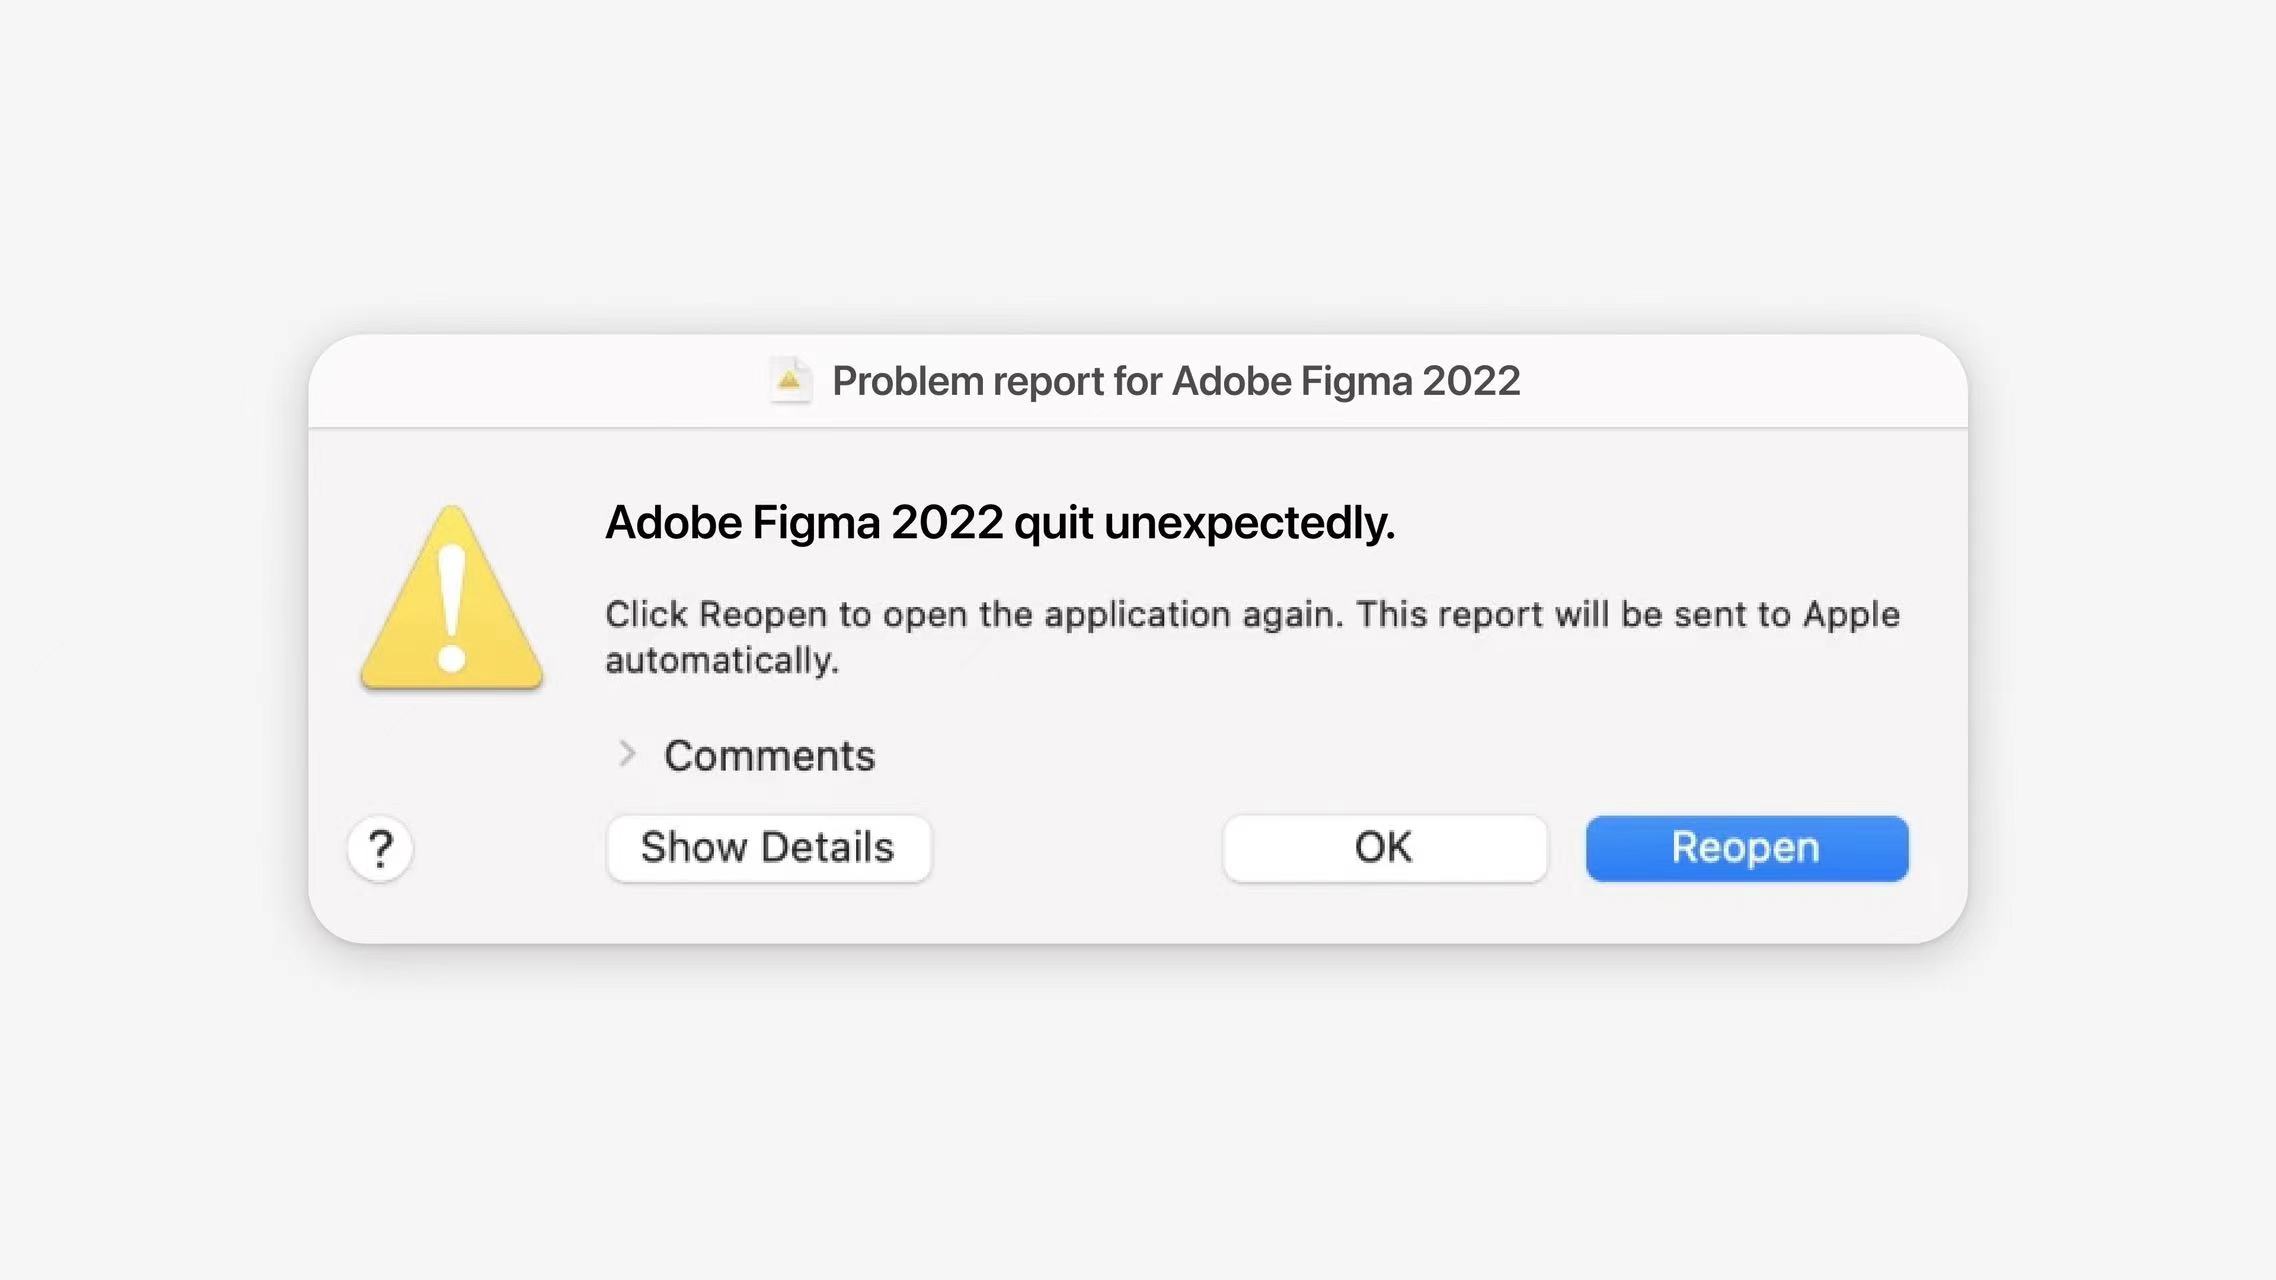 Adobe FIgme 2022 quit unexpectedly warning modal